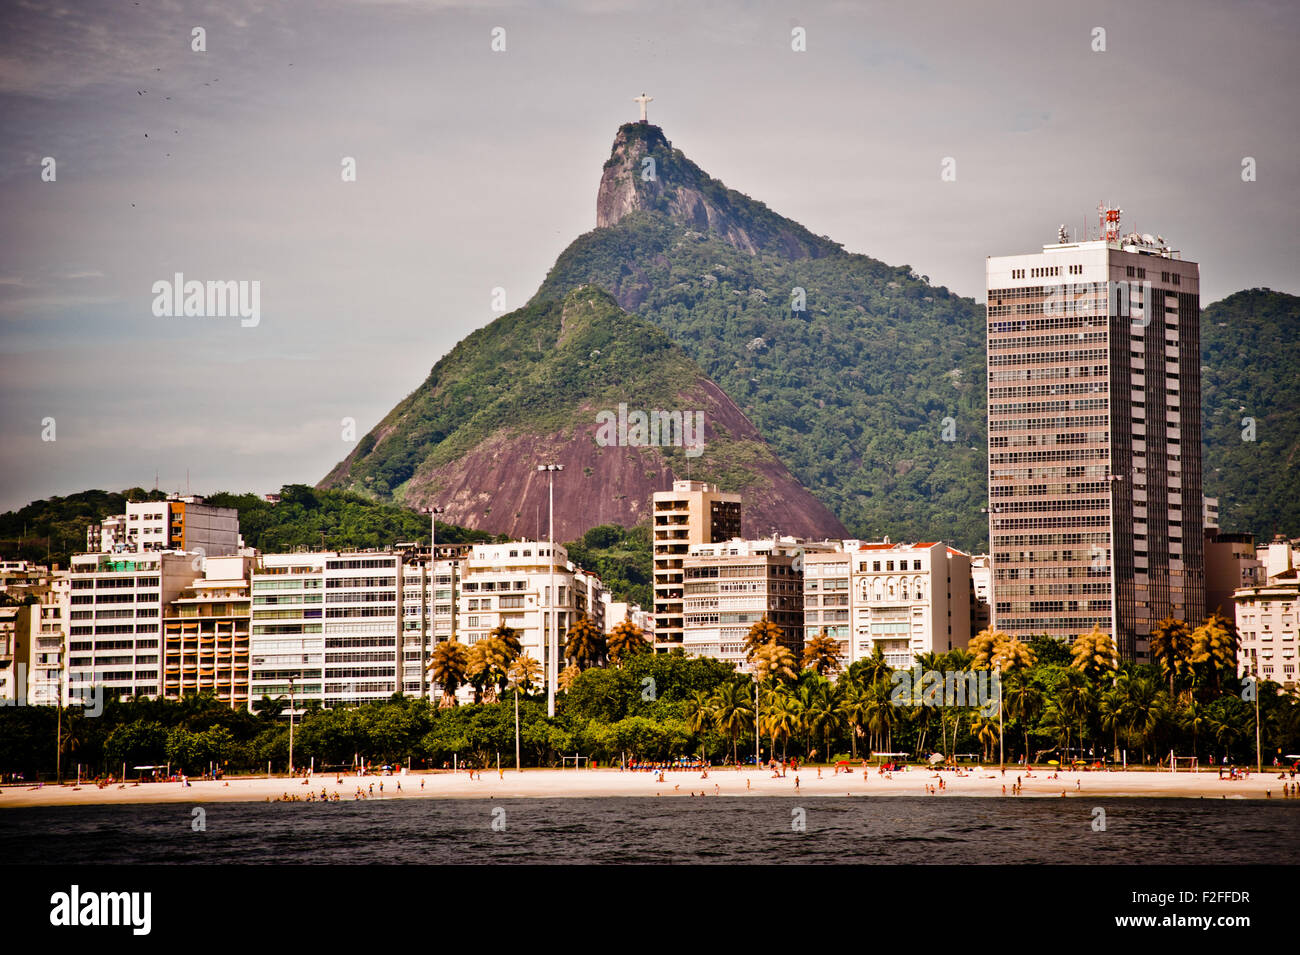 Scenic view of Rio de Janiero city with Christ the Redeemer statue on ...